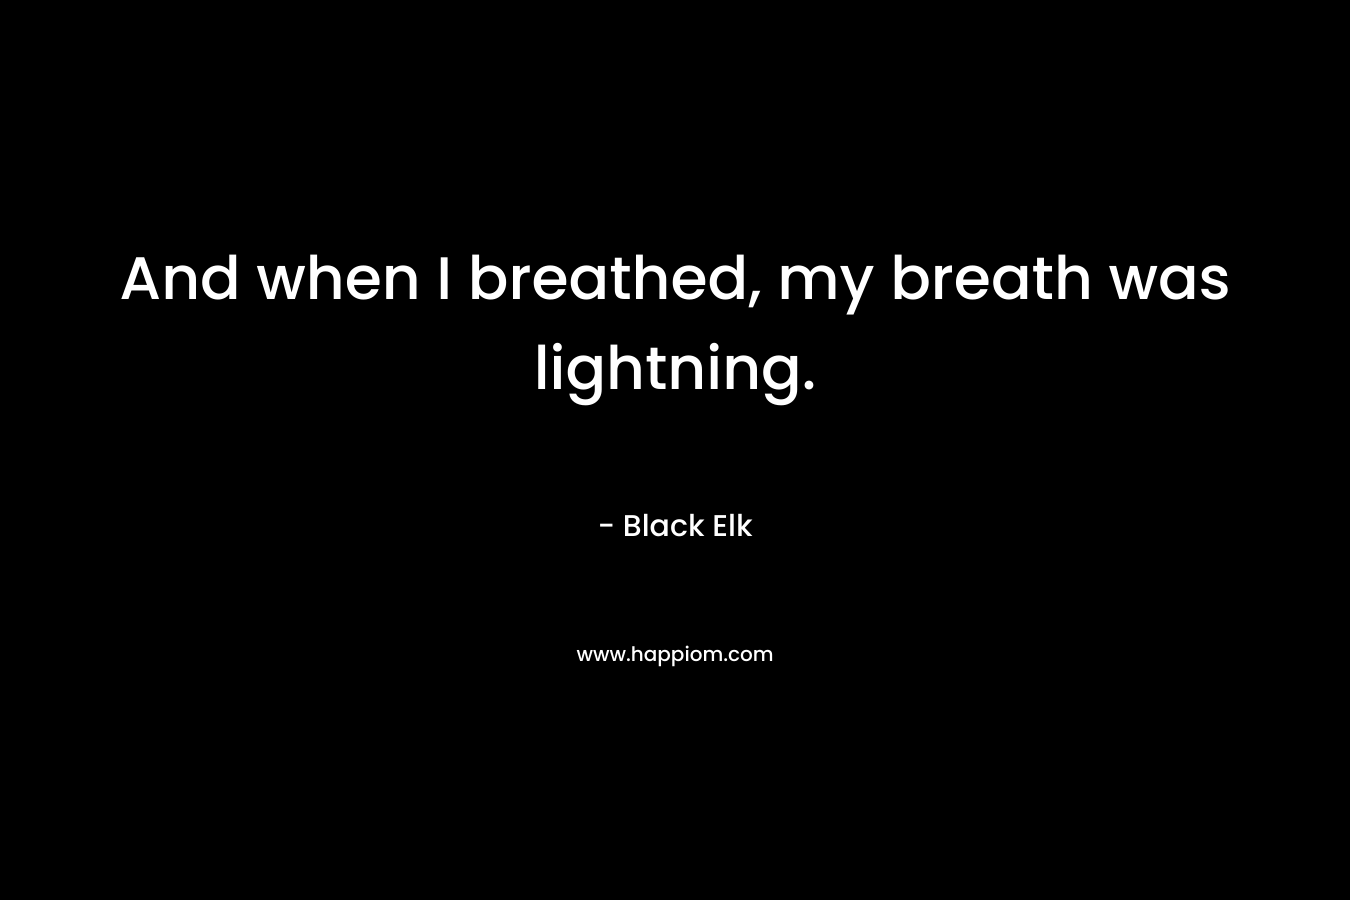 And when I breathed, my breath was lightning.